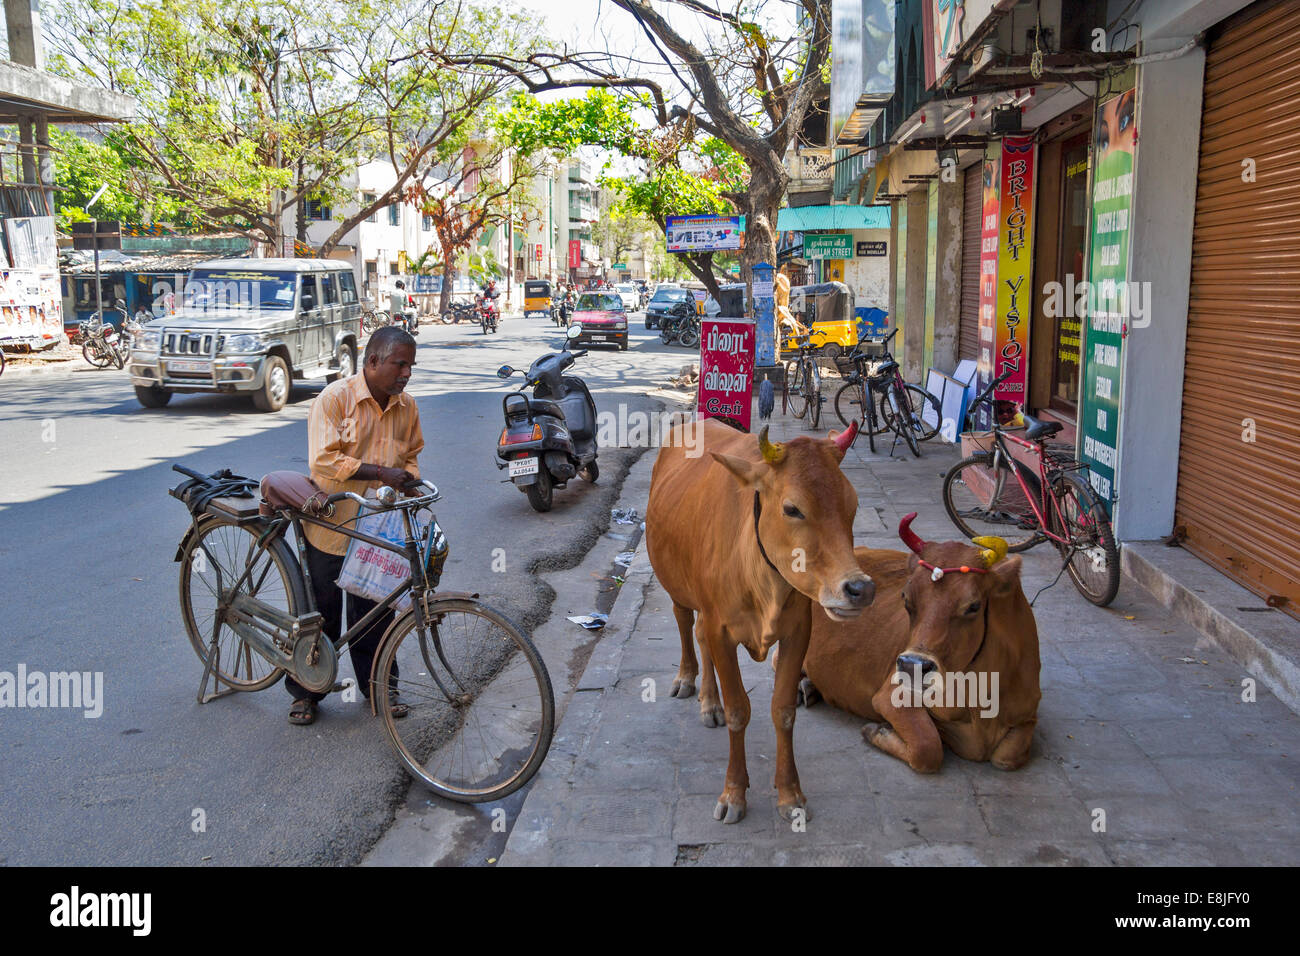 PONDICHERRY INDIA TREE LINED STREETS AND CATTLE OR COWS ON THE PAVEMENT Stock Photo